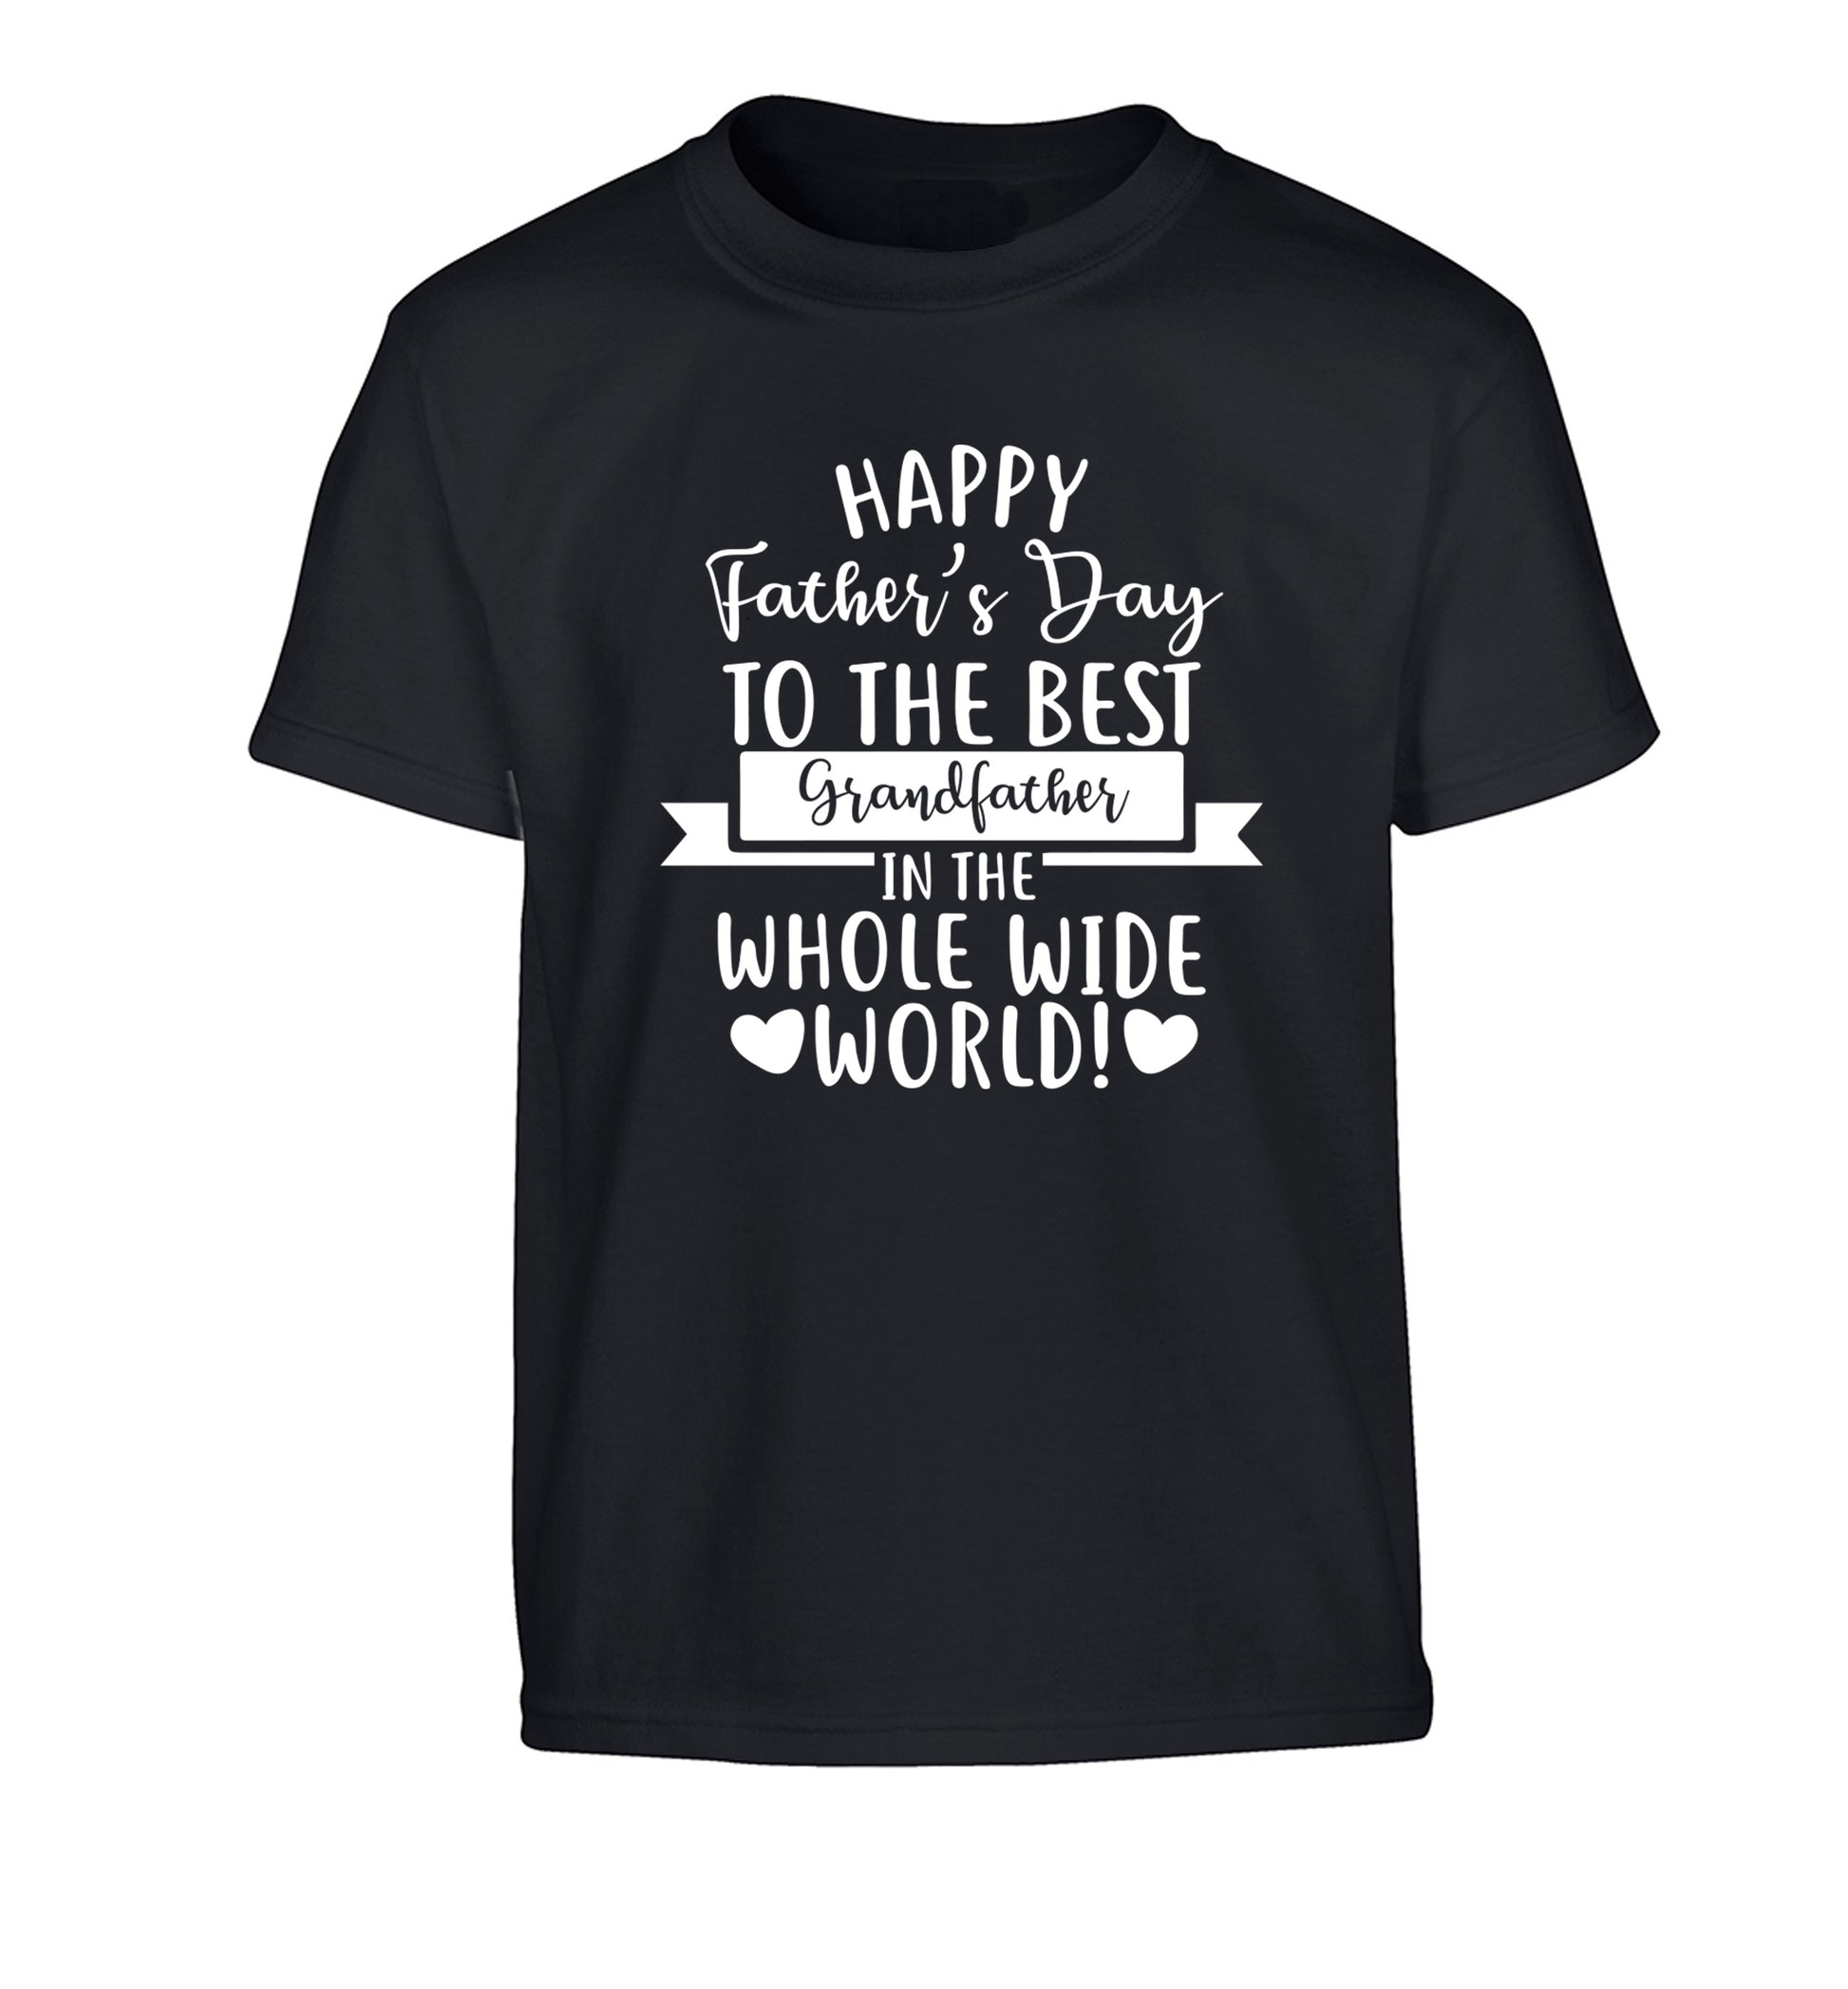 Happy Father's Day to the best grandfather in the world Children's black Tshirt 12-13 Years